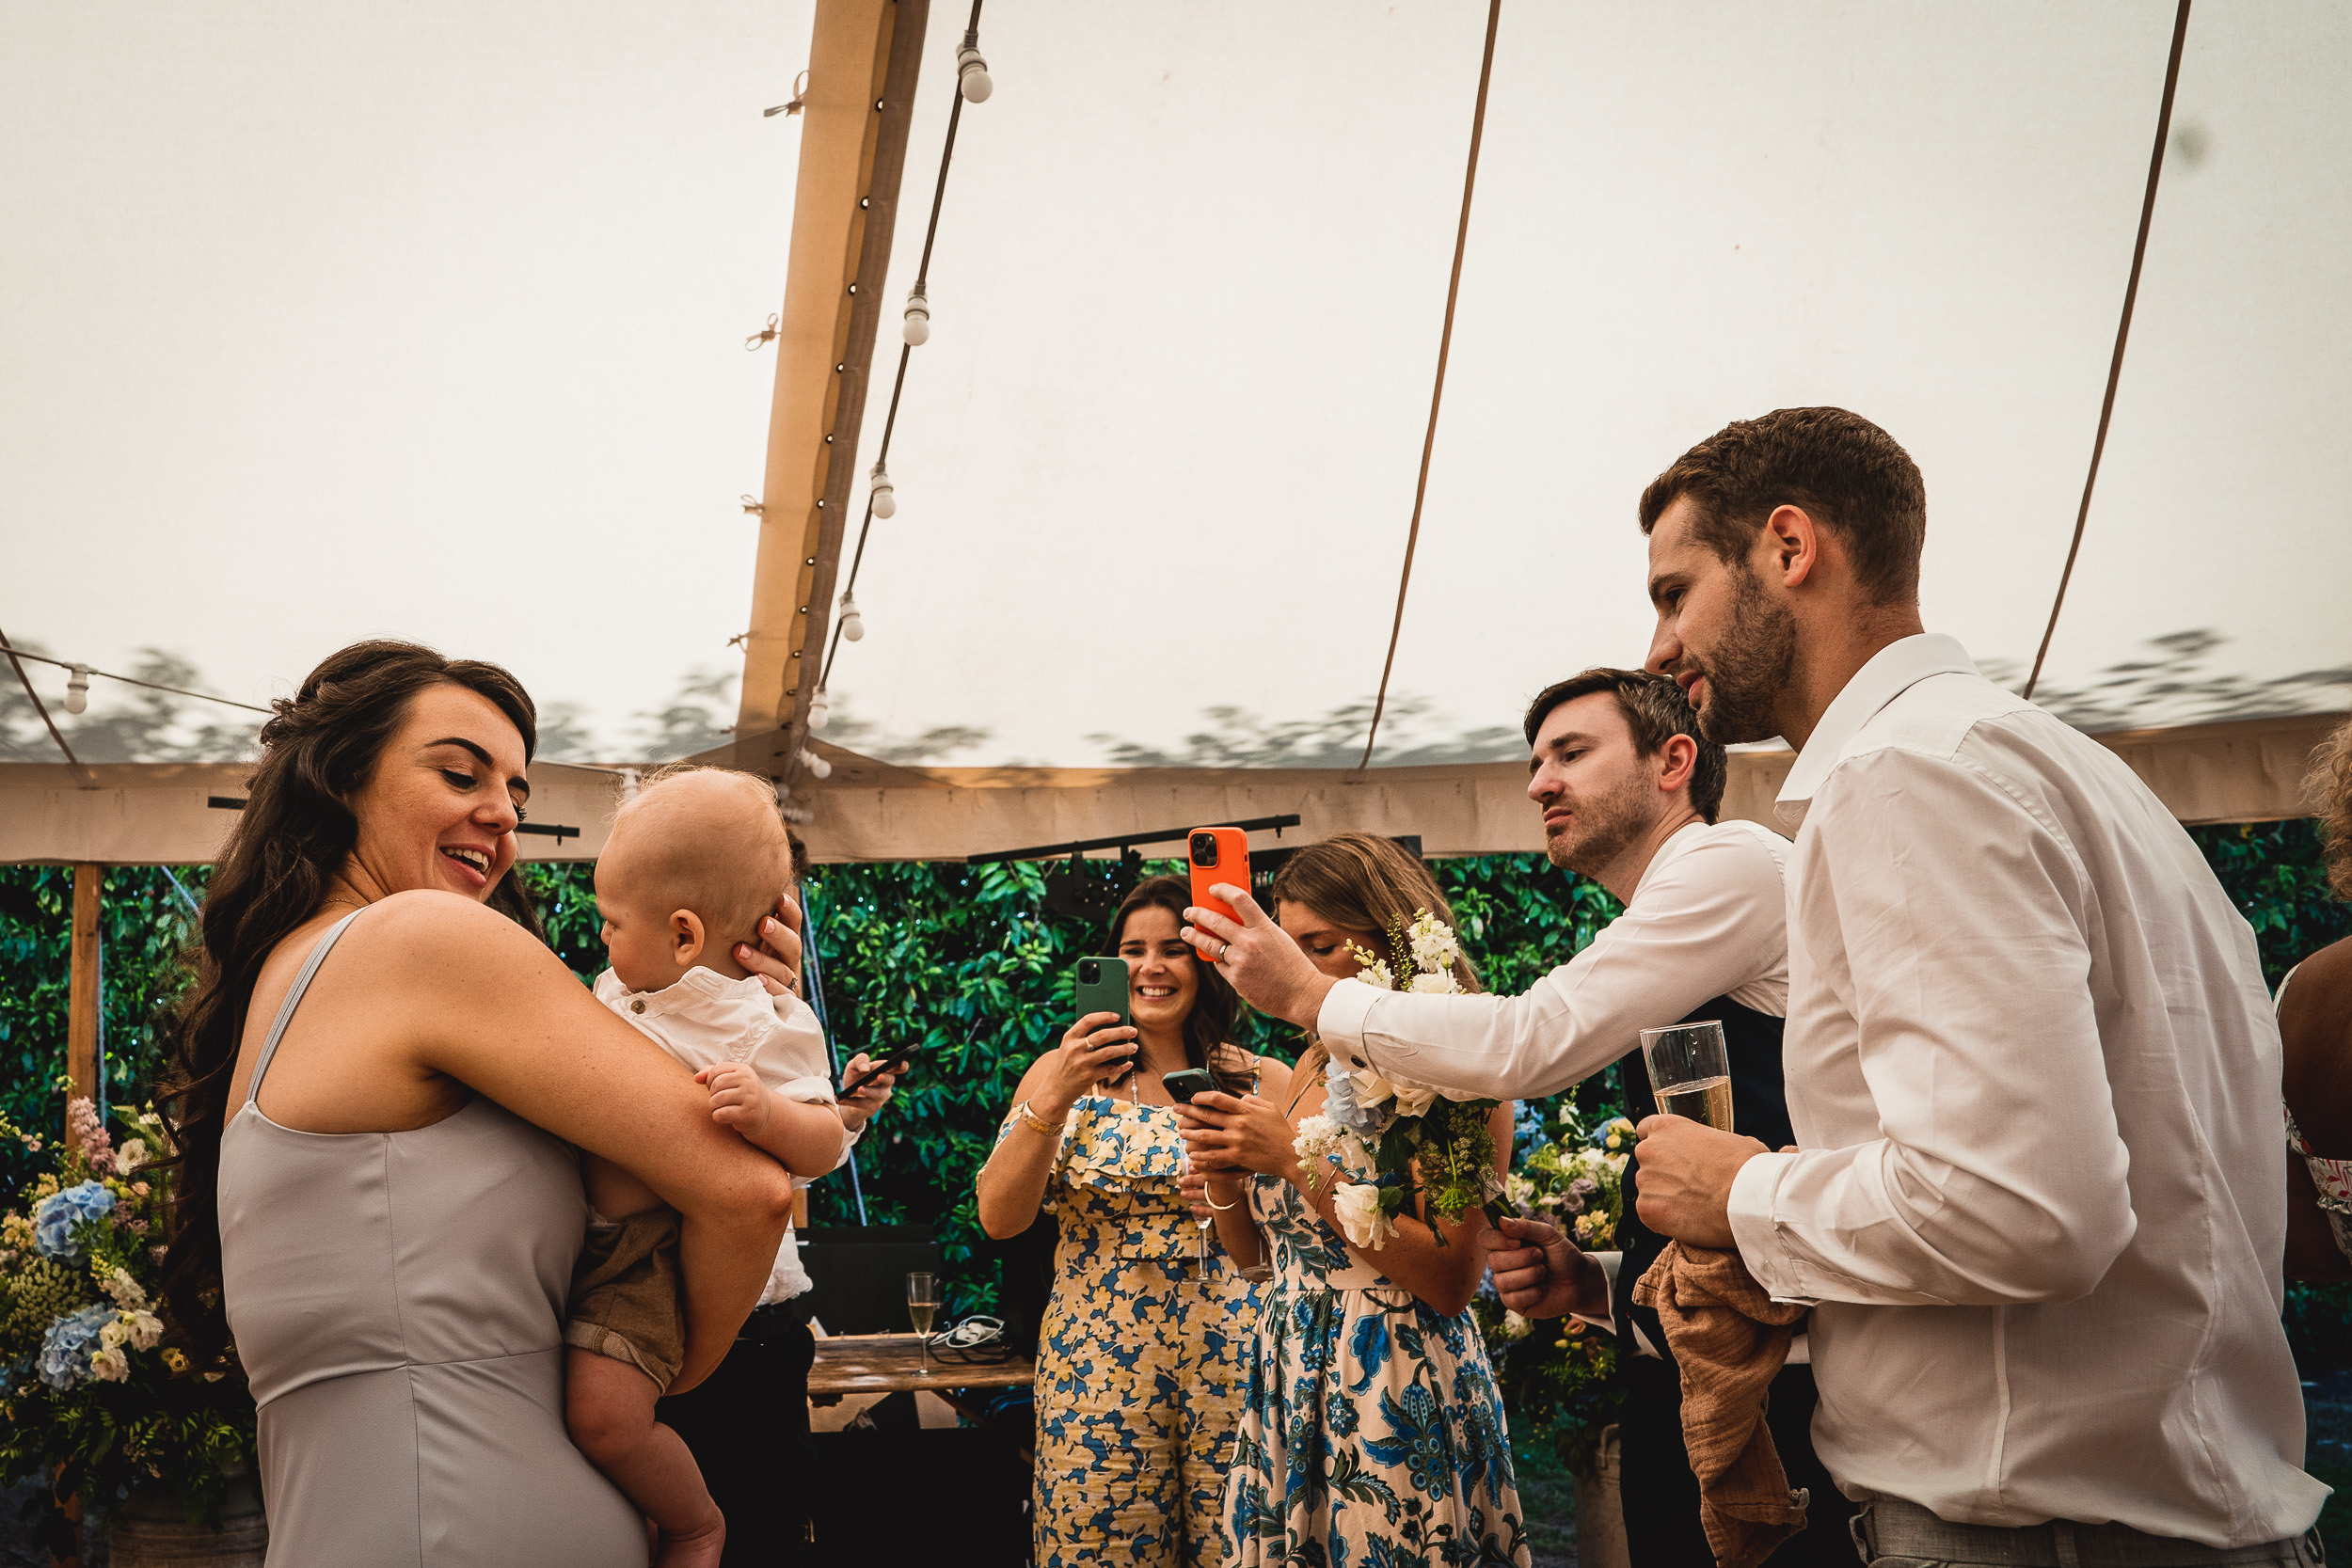 A bride, groom, and wedding photographer gather in a tent with a baby in their arms.